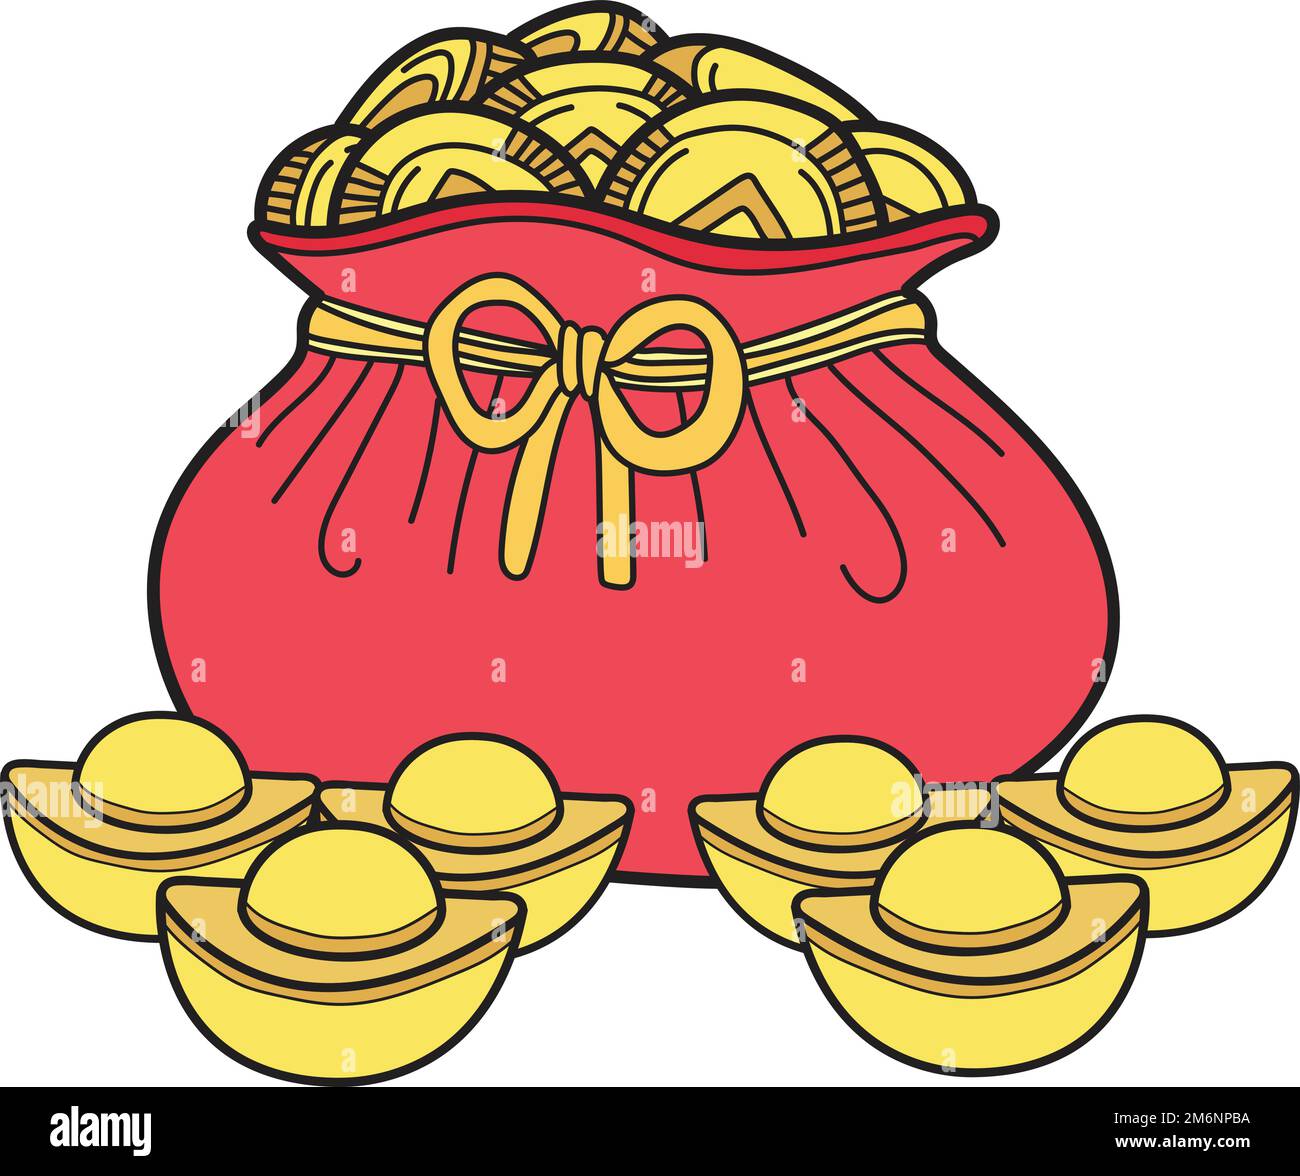 Hand Drawn chinese money bag illustration isolated on background Stock Vector